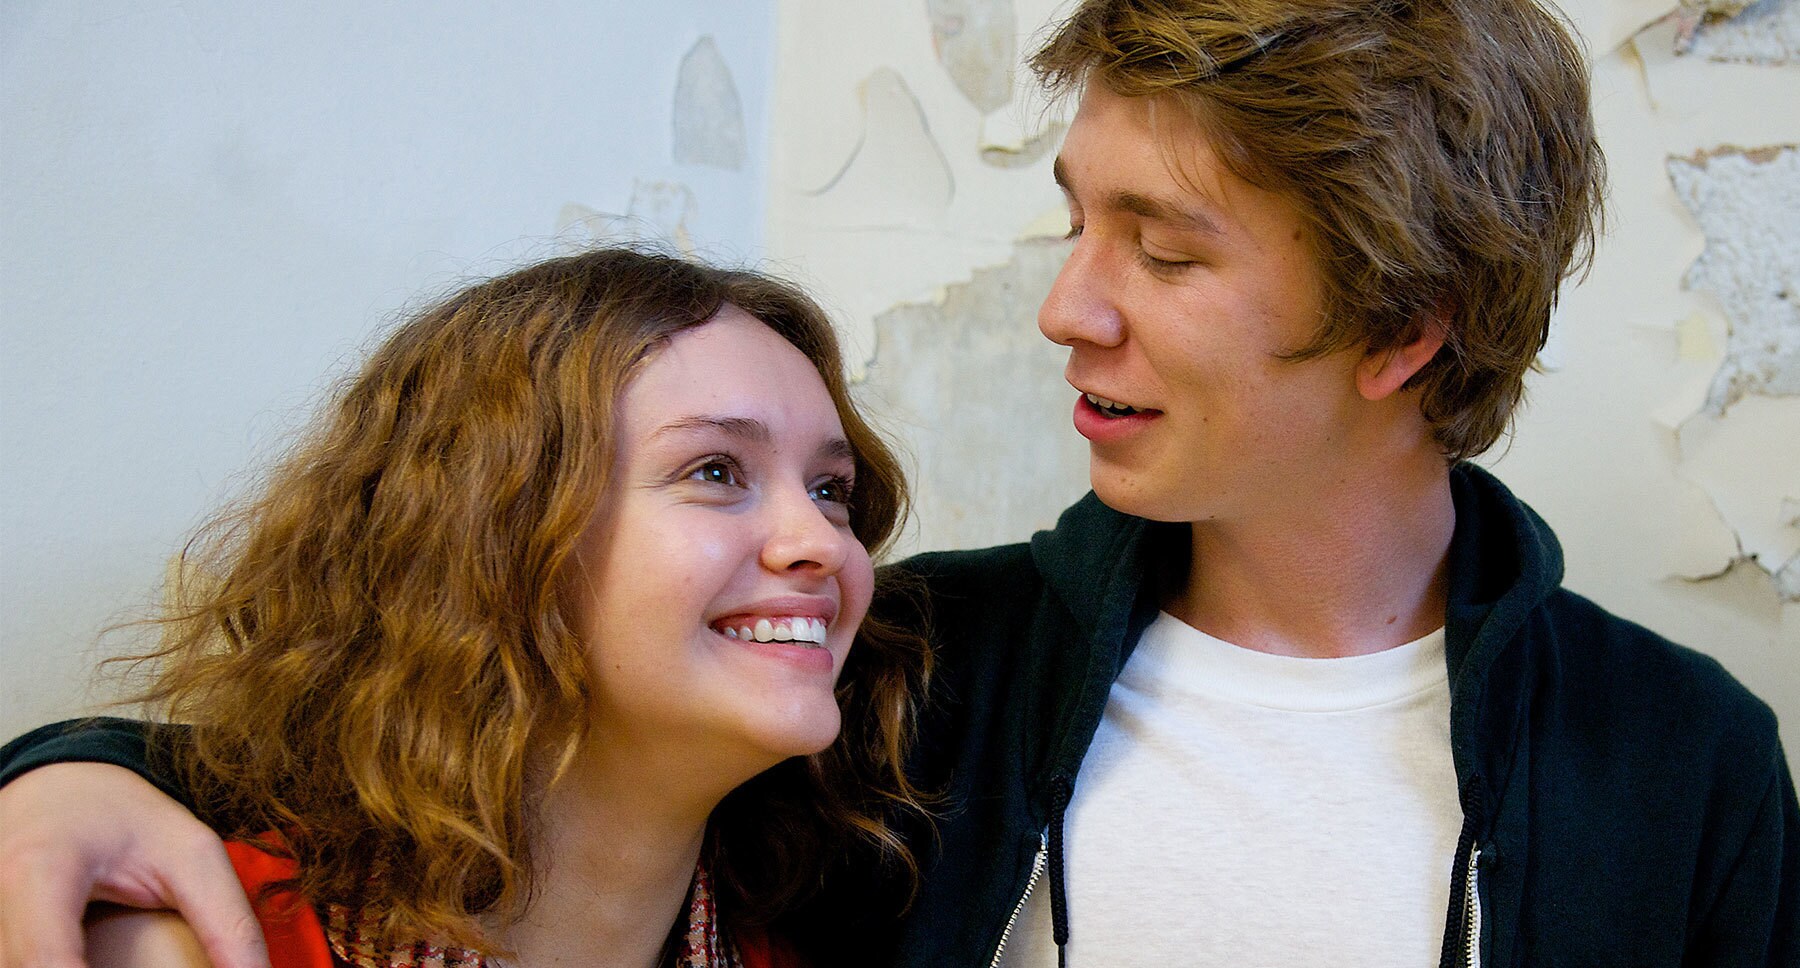 Thomas Mann (as Greg) and Olivia Cooke (as Rachel) Thomas Mann (as Greg) with a stuffed toy pig in "Me and Earl and the Dying Girl" 